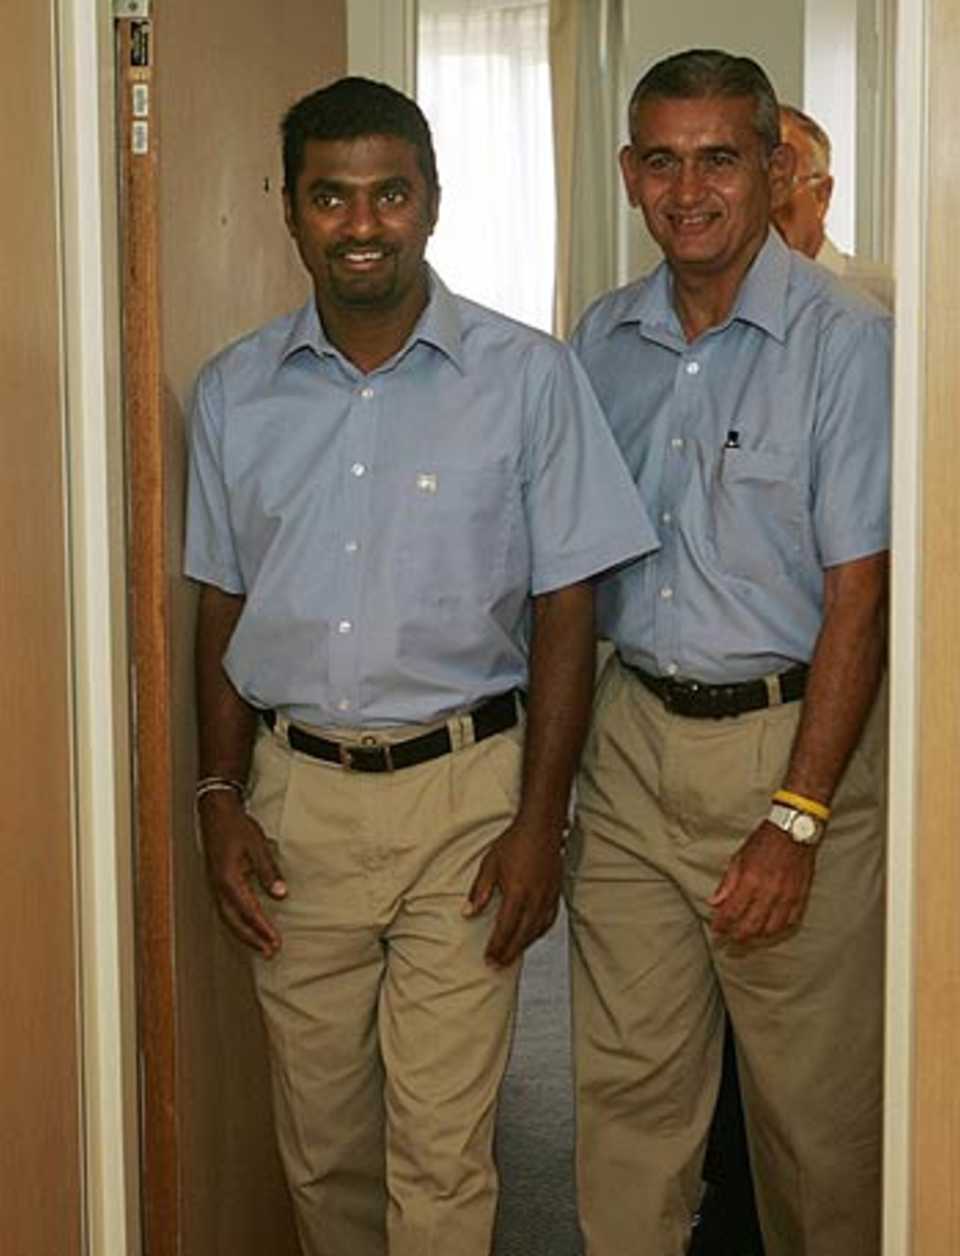 Muttiah Muralitharan and Michael Tissera, Sri Lanka's manager, arrive at a press conference at the University of Western Australia's School of Human Movement, Perth, February 4, 2006